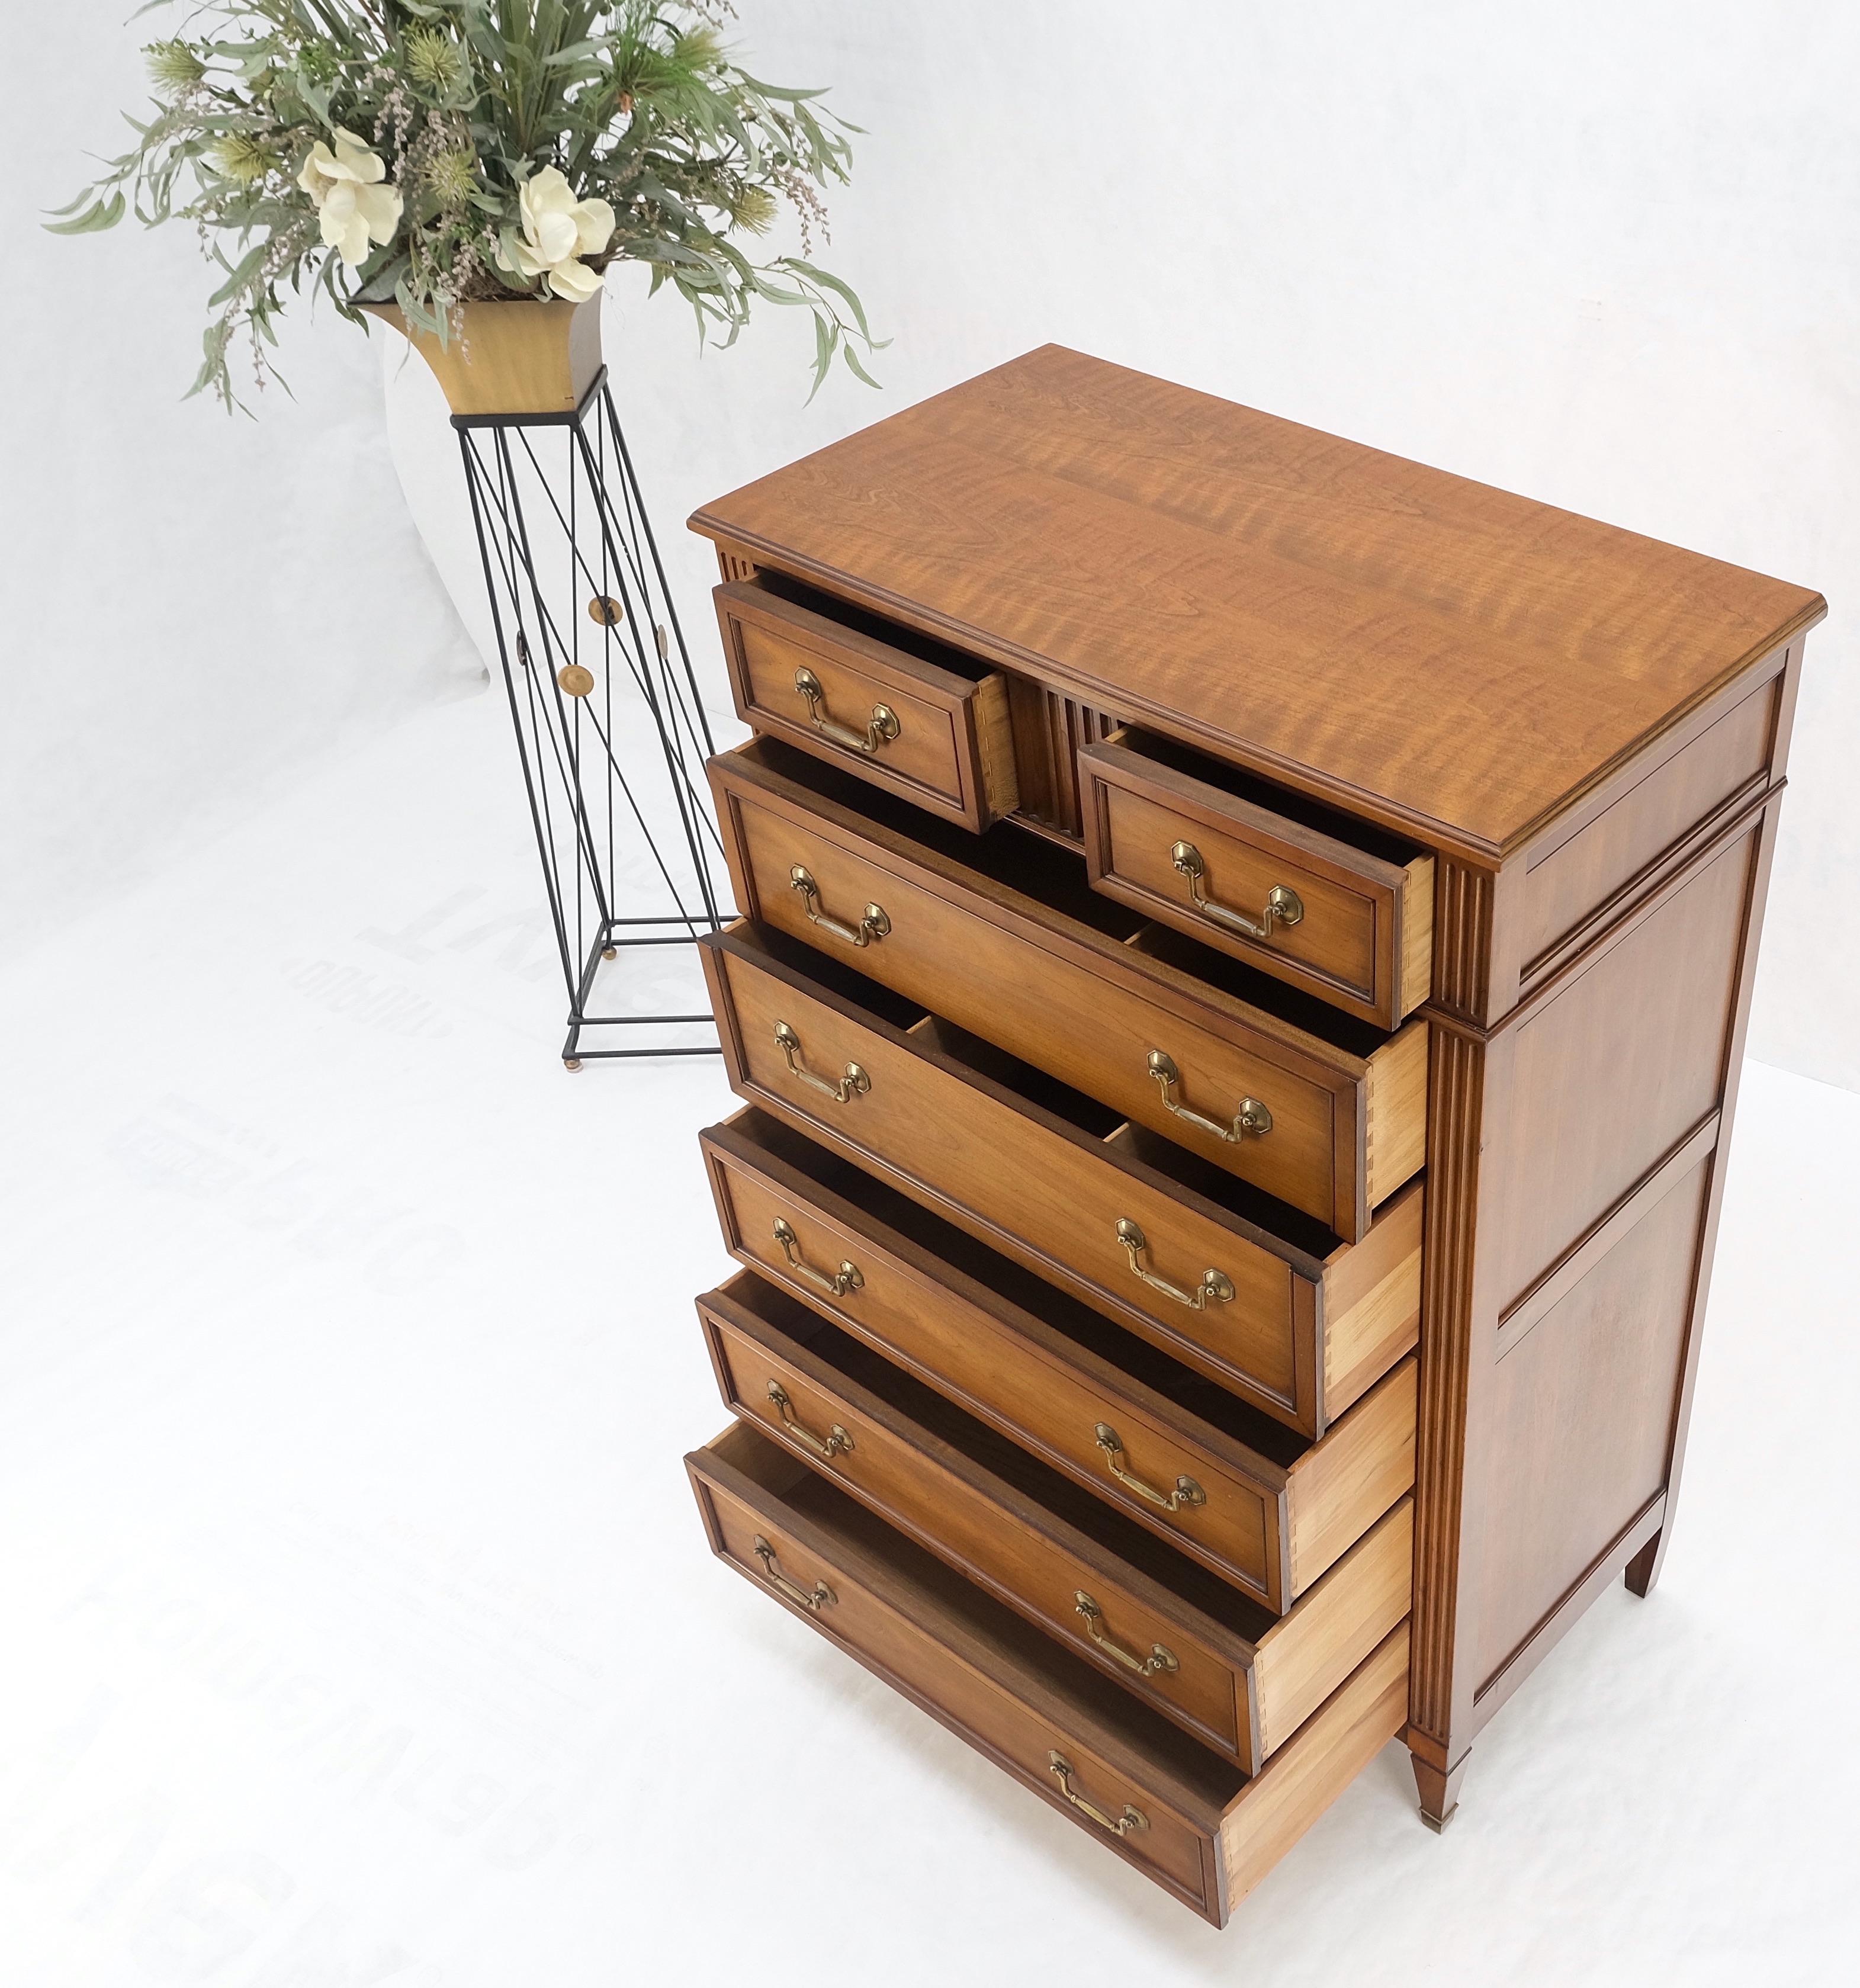 Kindel 7 Drawers Fruitwood Heavy Brass Drop Pulls High Chest Tall Dresser Mint! For Sale 11